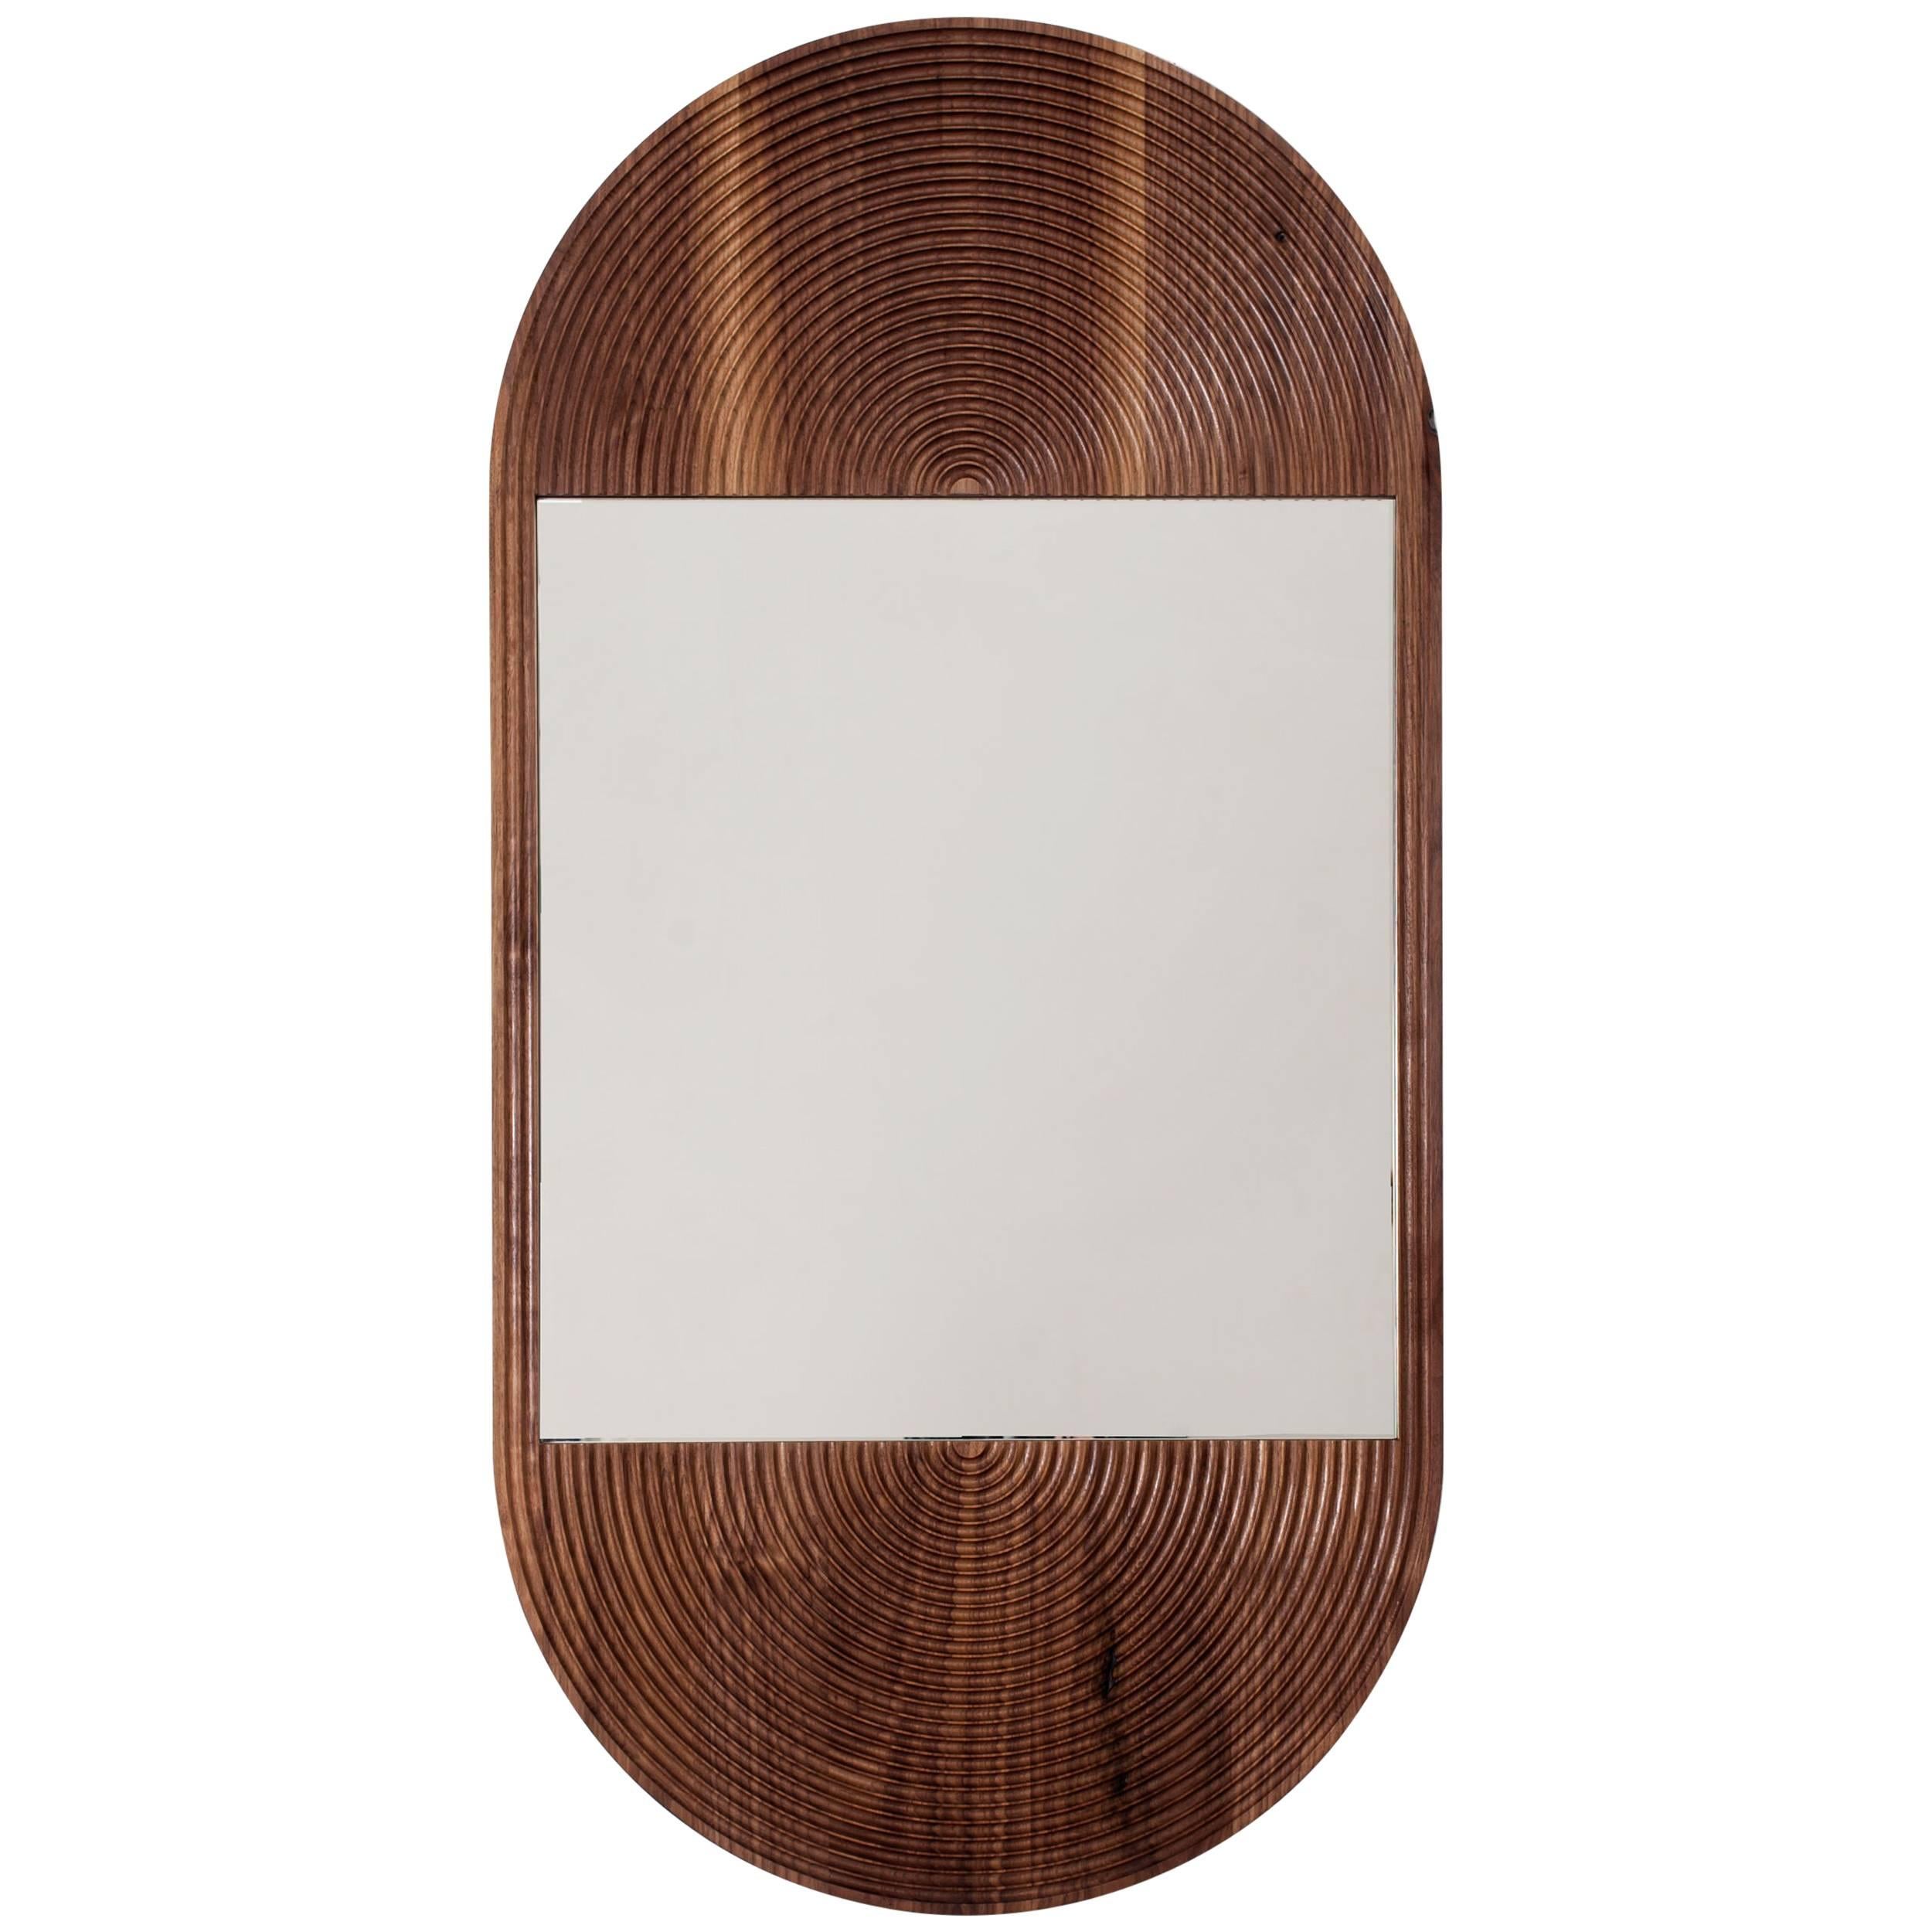 June Mirror, Large in Carved Walnut and Hand-cut Mirror